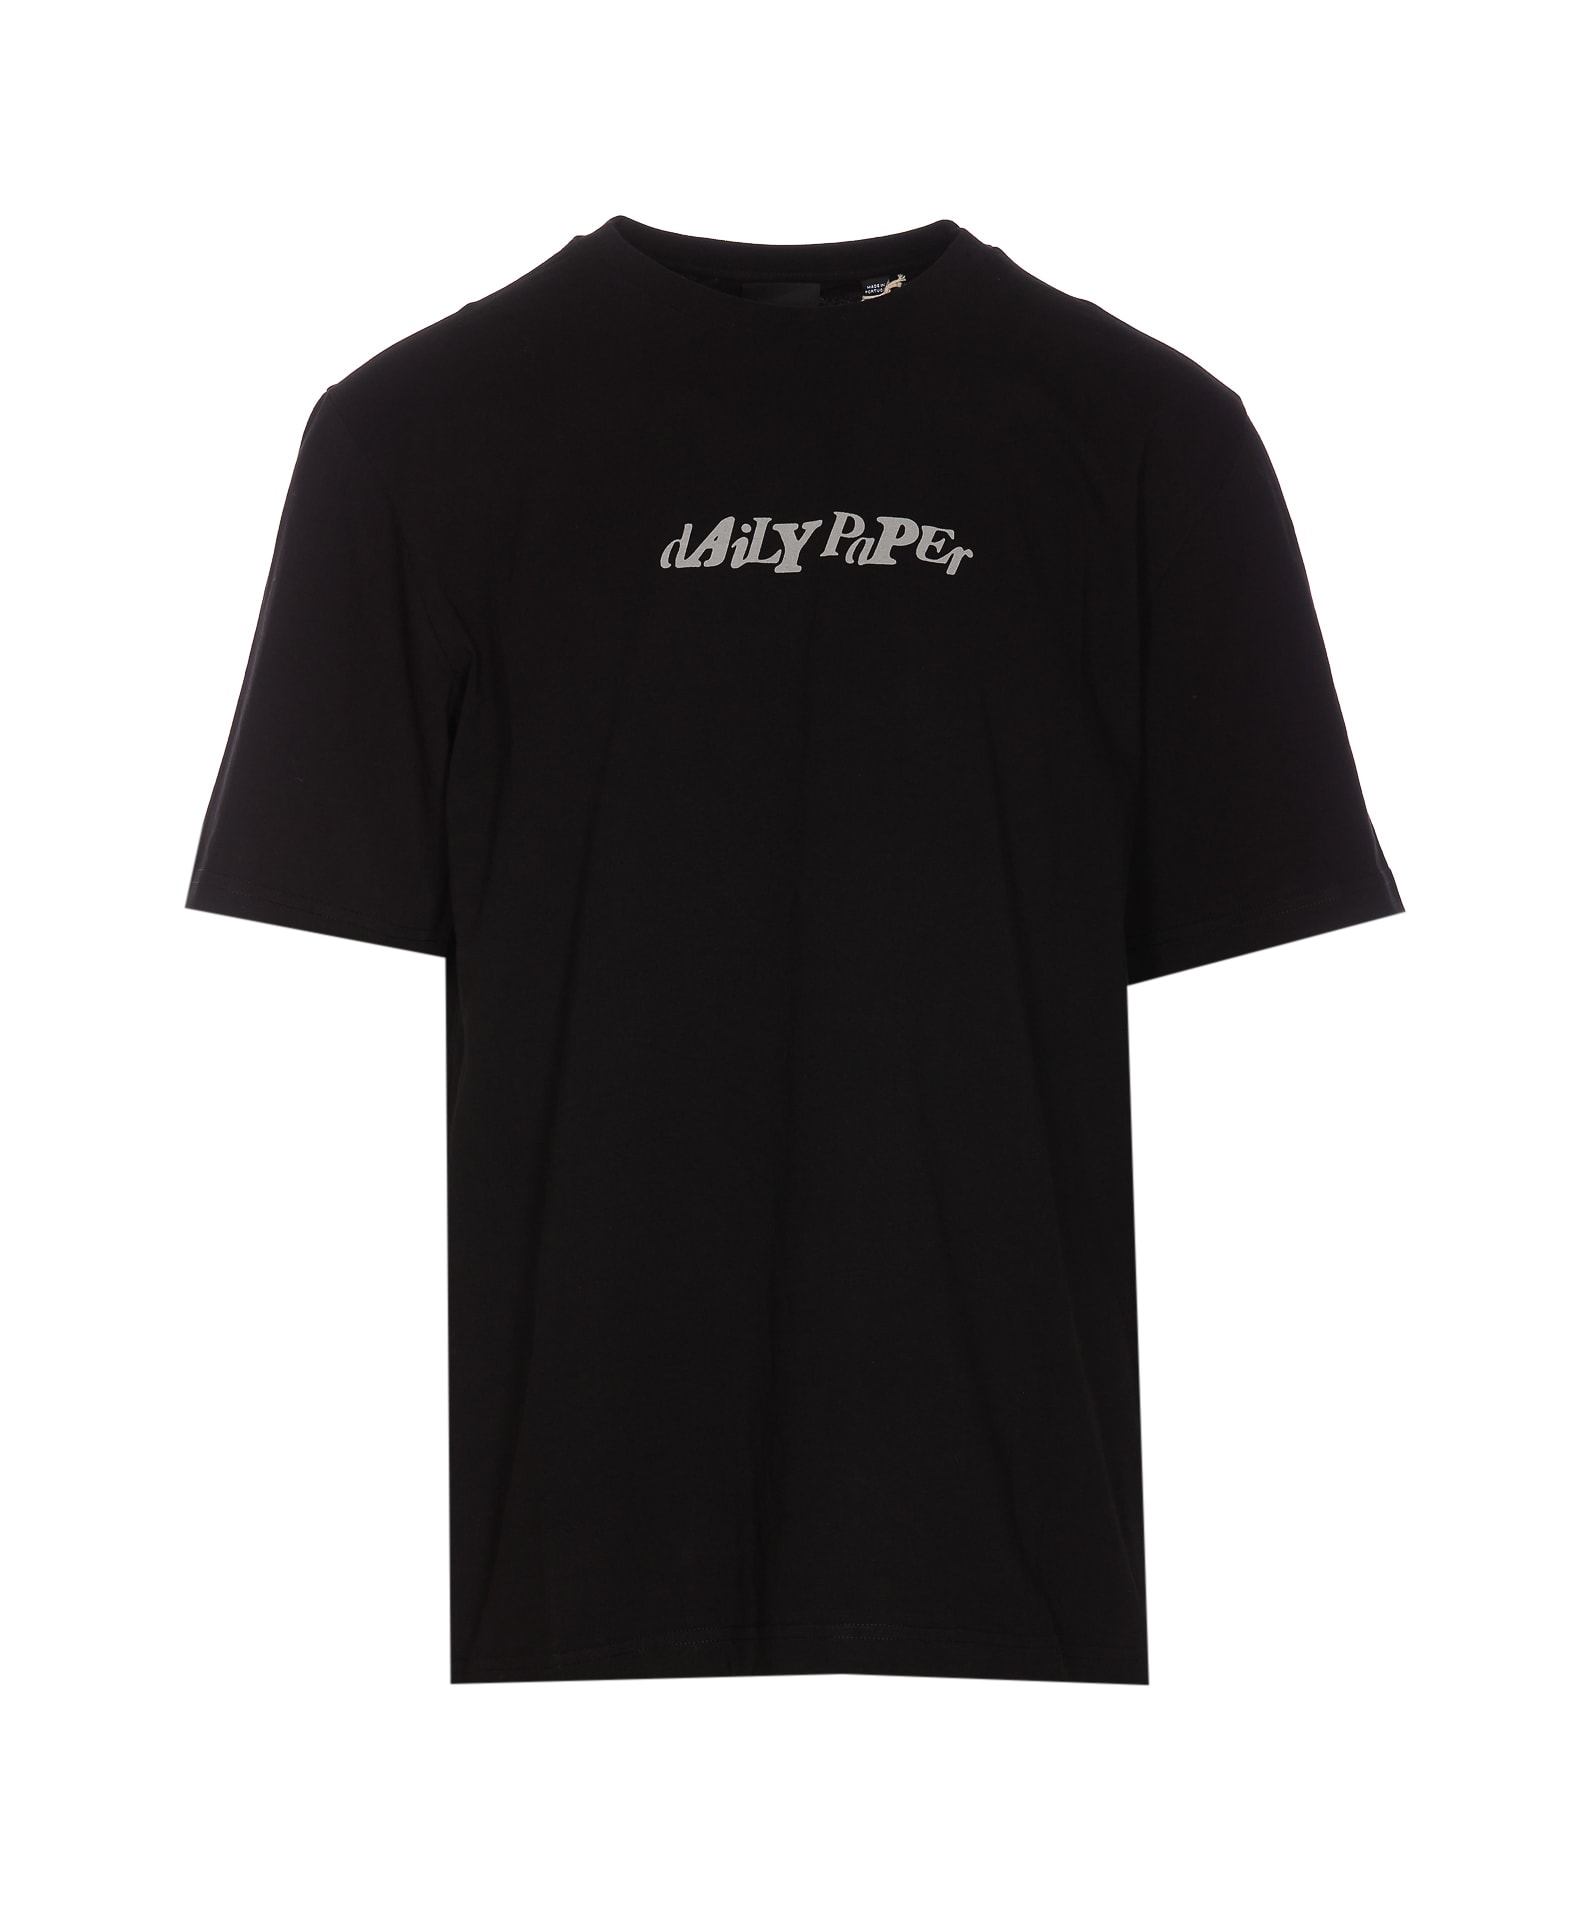 DAILY PAPER UNIFIED TYPE BOXY T-SHIRT